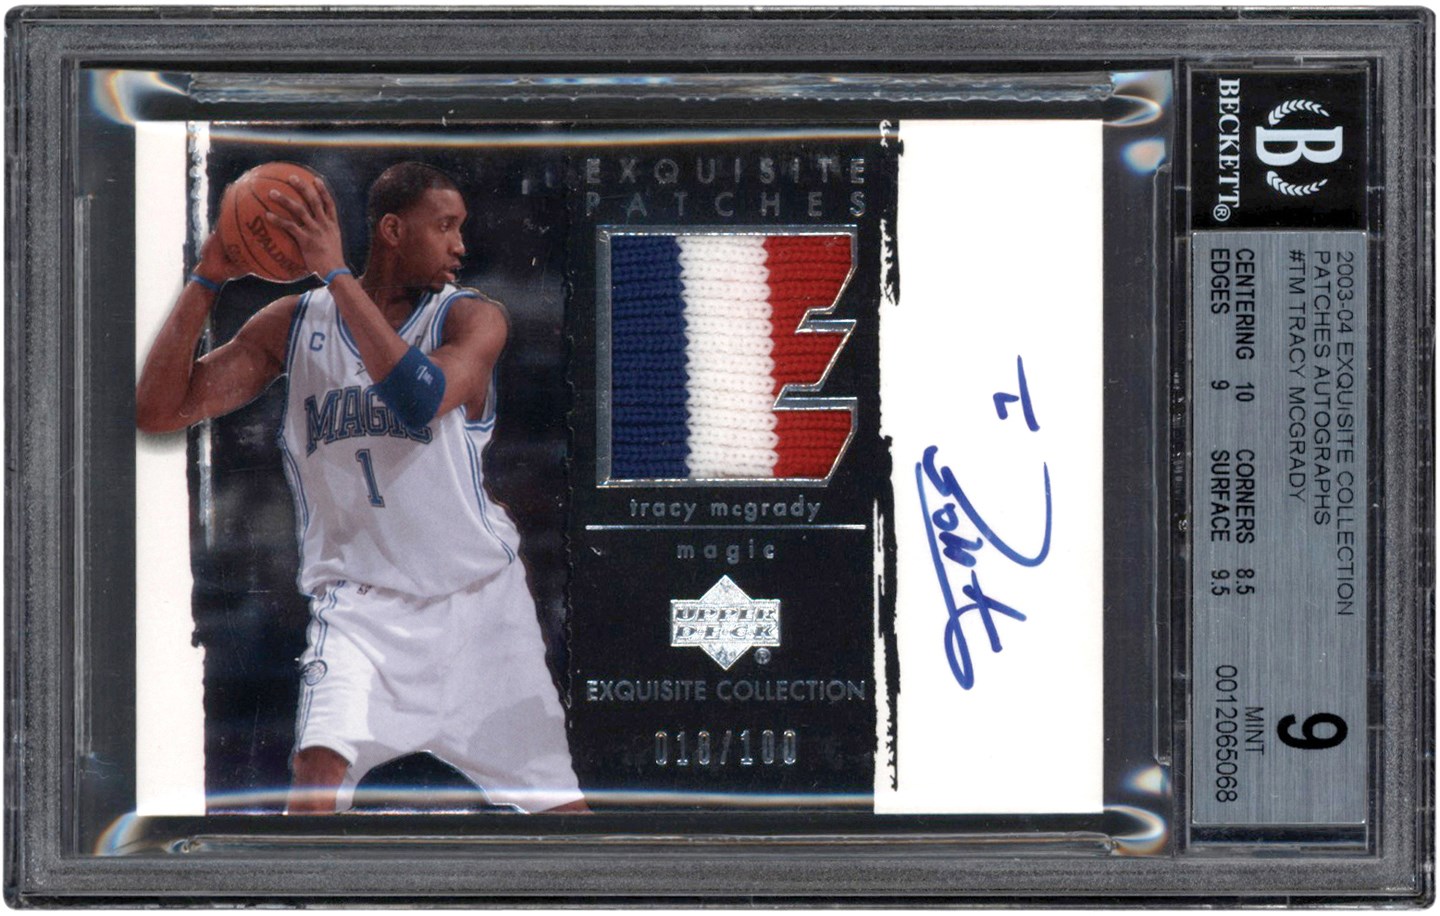 Basketball Cards - 2003-2004 UD Exquisite Basketball Collection Patches Autographs #TM Tracy McGrady Signed NBA All Star Game Used Patch #18/100 BGS MINT 9 Auto 10